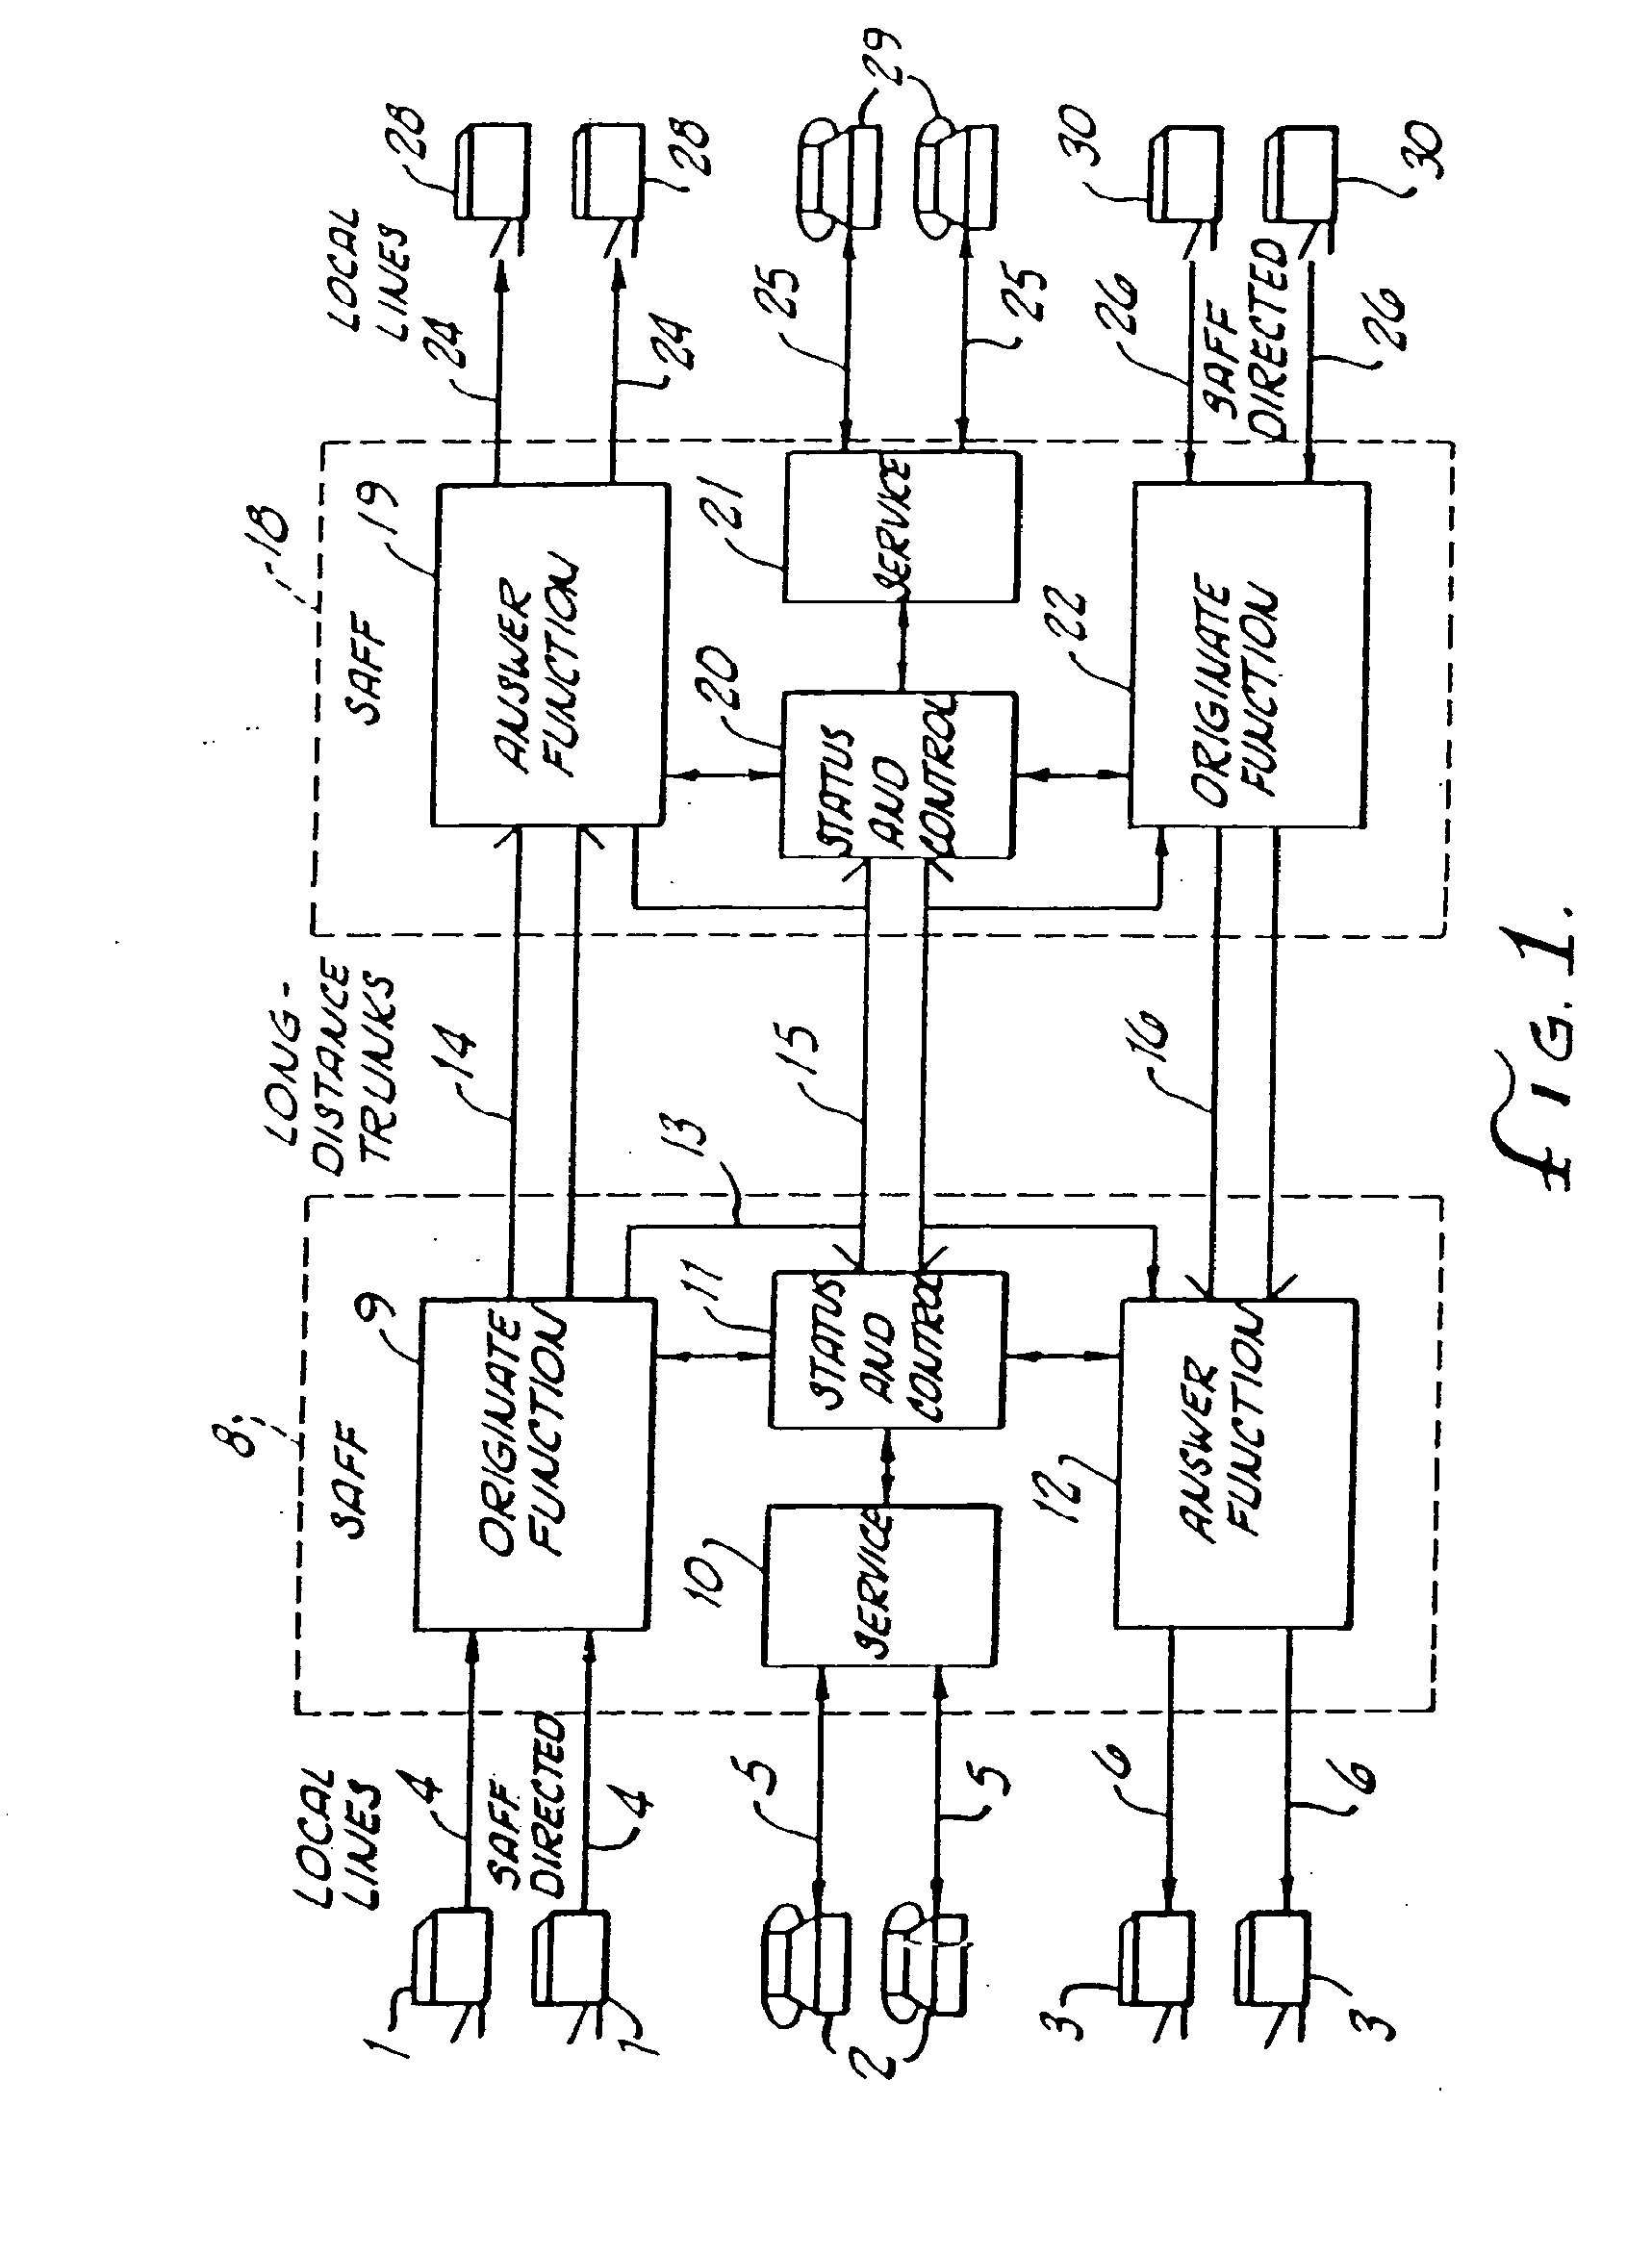 Facsimile telecommunications system and method